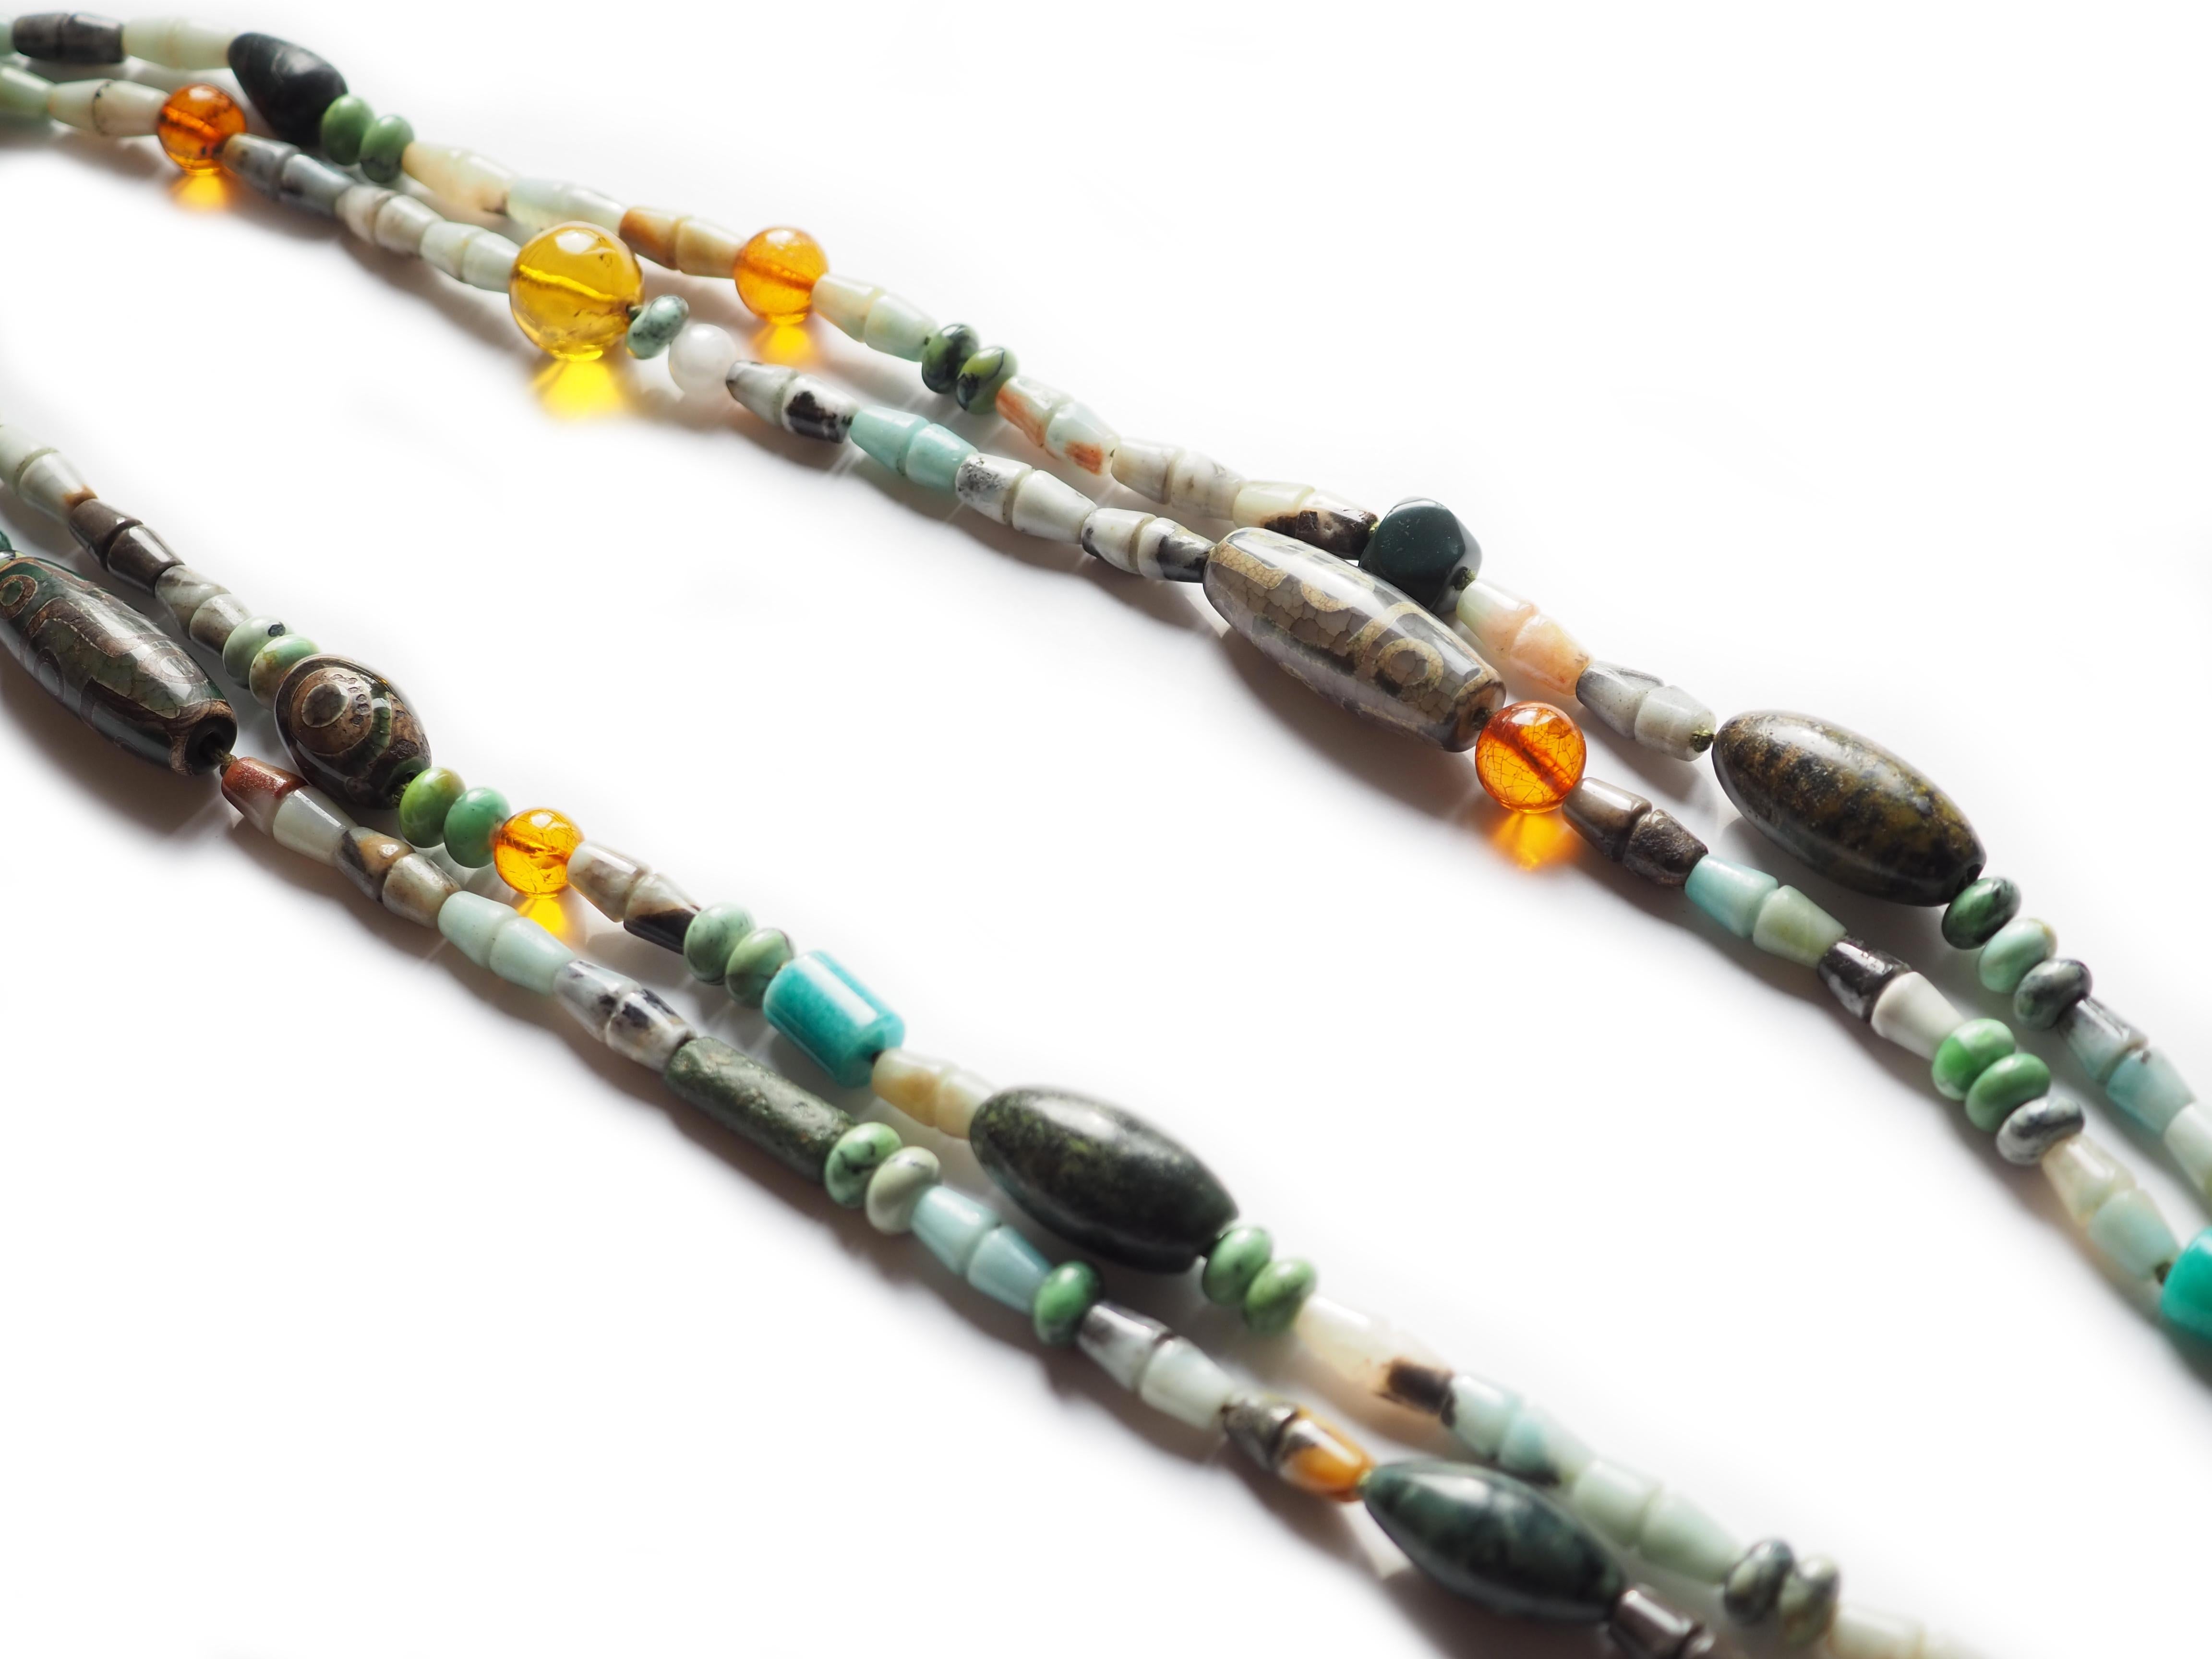 Amazonite Jasper Amber Dzi murrina style Long Double Long Necklace make with all antique pieces Africans and Tibetan, 84 cm long.
All Giulia Colussi jewelry is new and has never been previously owned or worn. Each item will arrive at your door